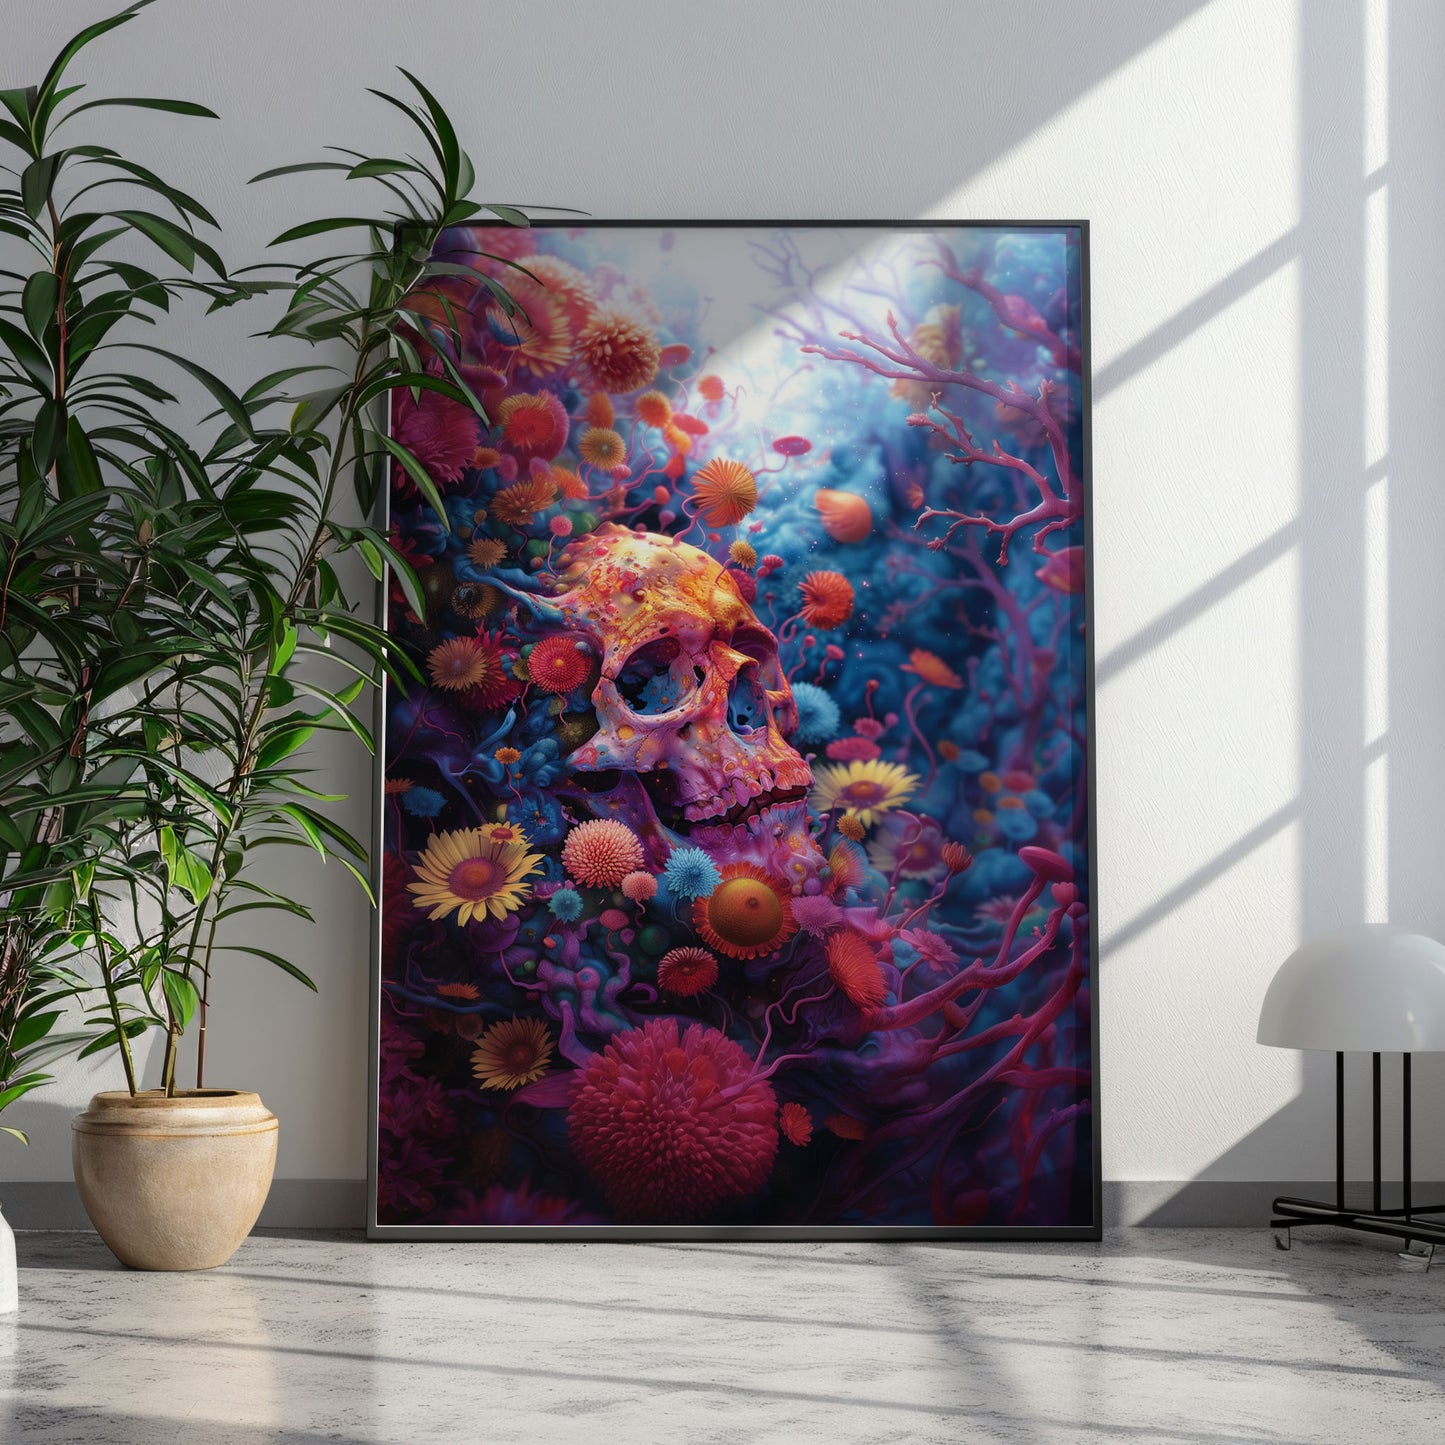 Eerie Floral Skull Art - Vibrant and Radiant Weirdcore Wall Decor